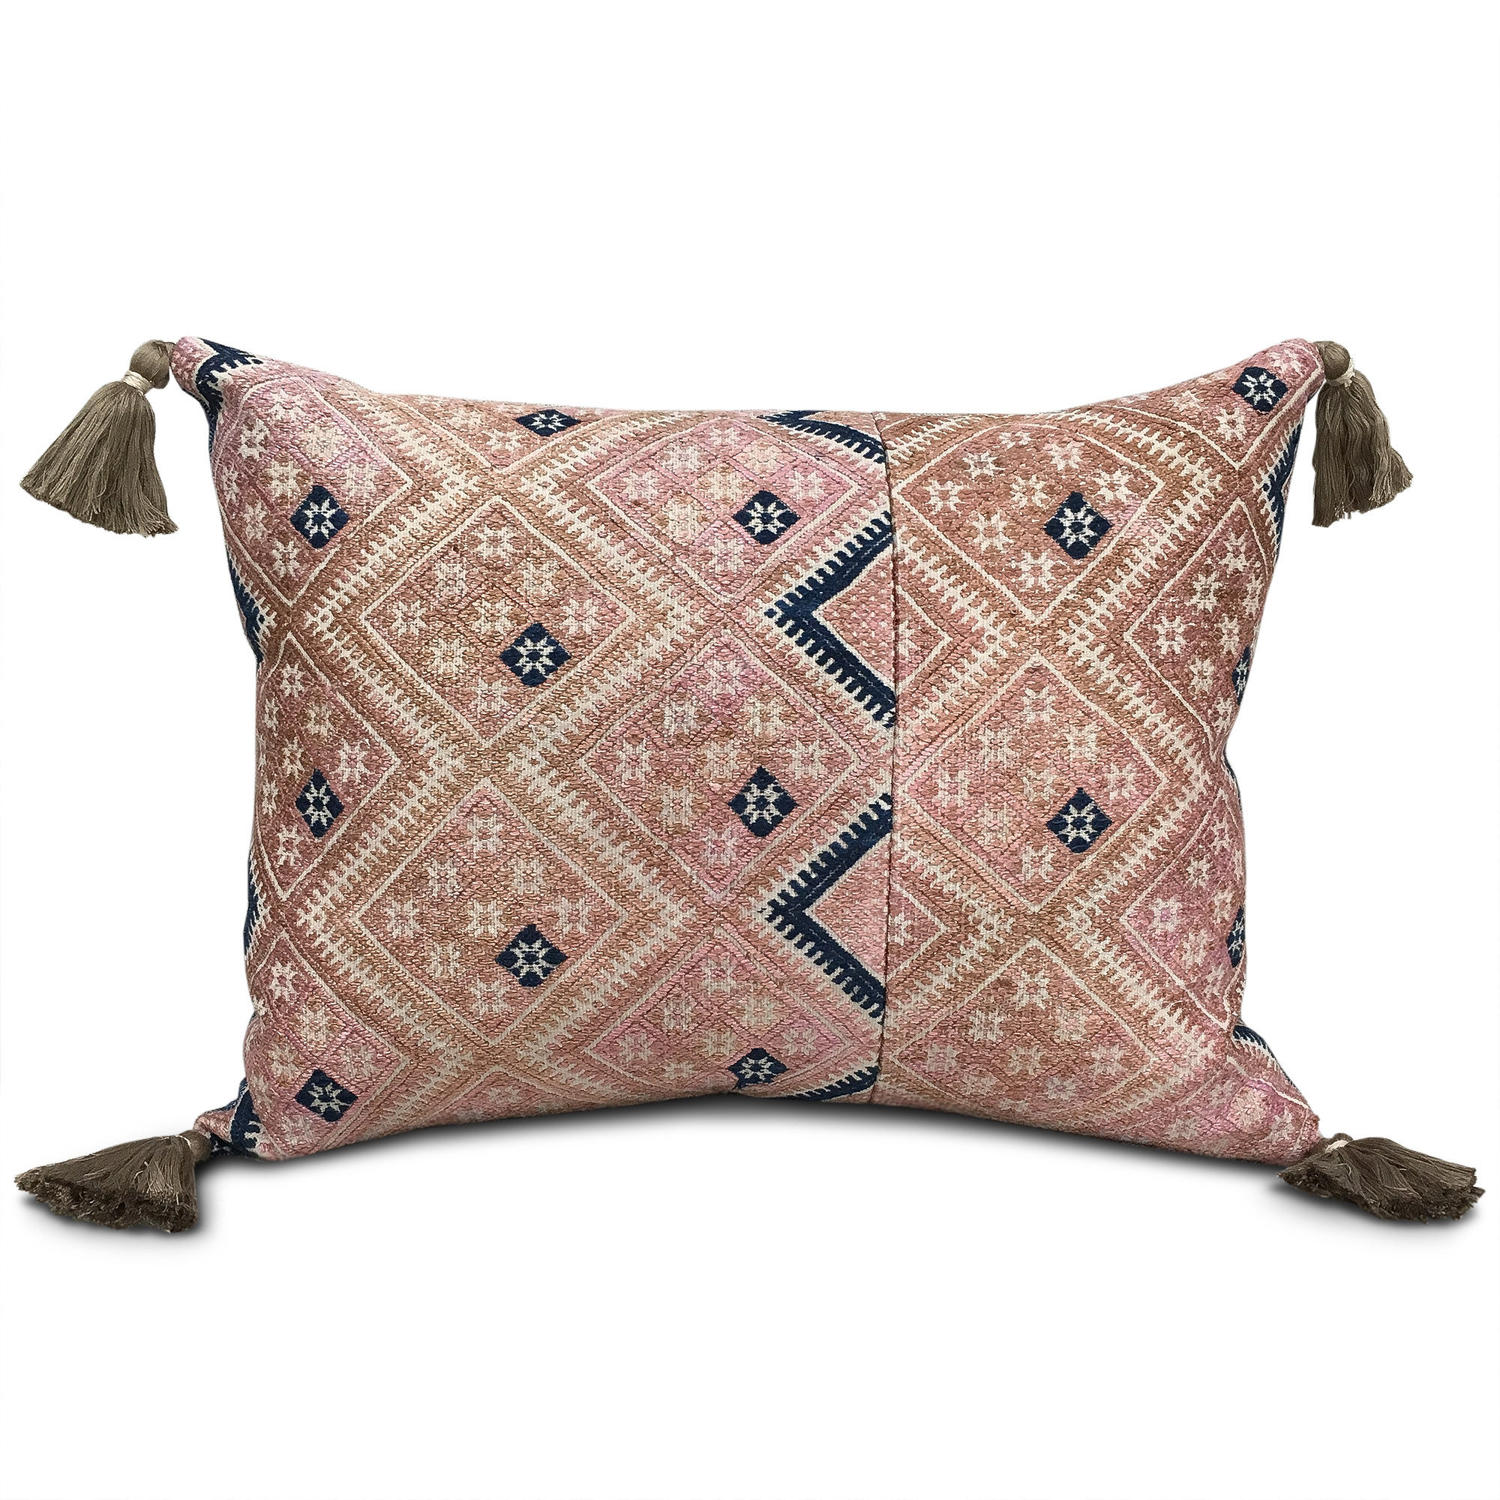 Zhuang Cushion with Tassels